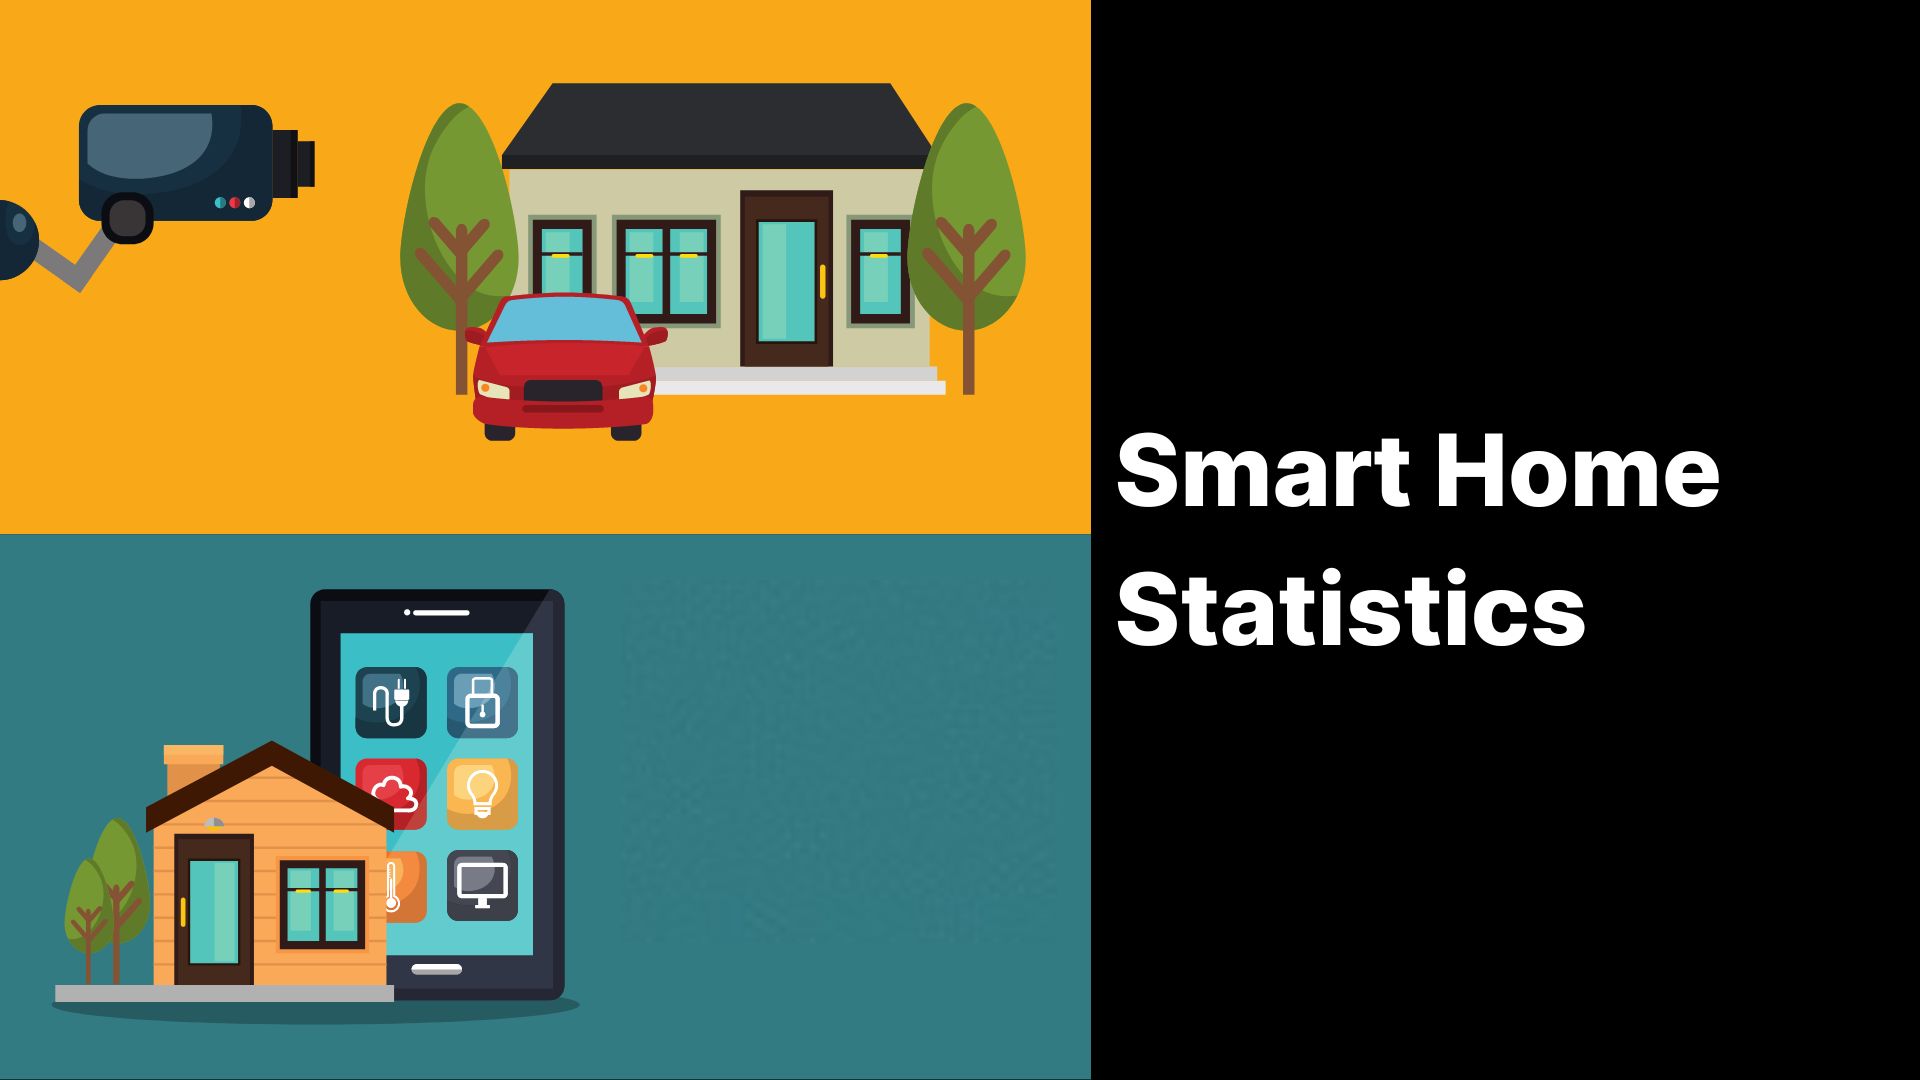 Smart Home Statistics – By Region, Cost Saving, Devices, Brands, Demographics and Reasons for Adoption